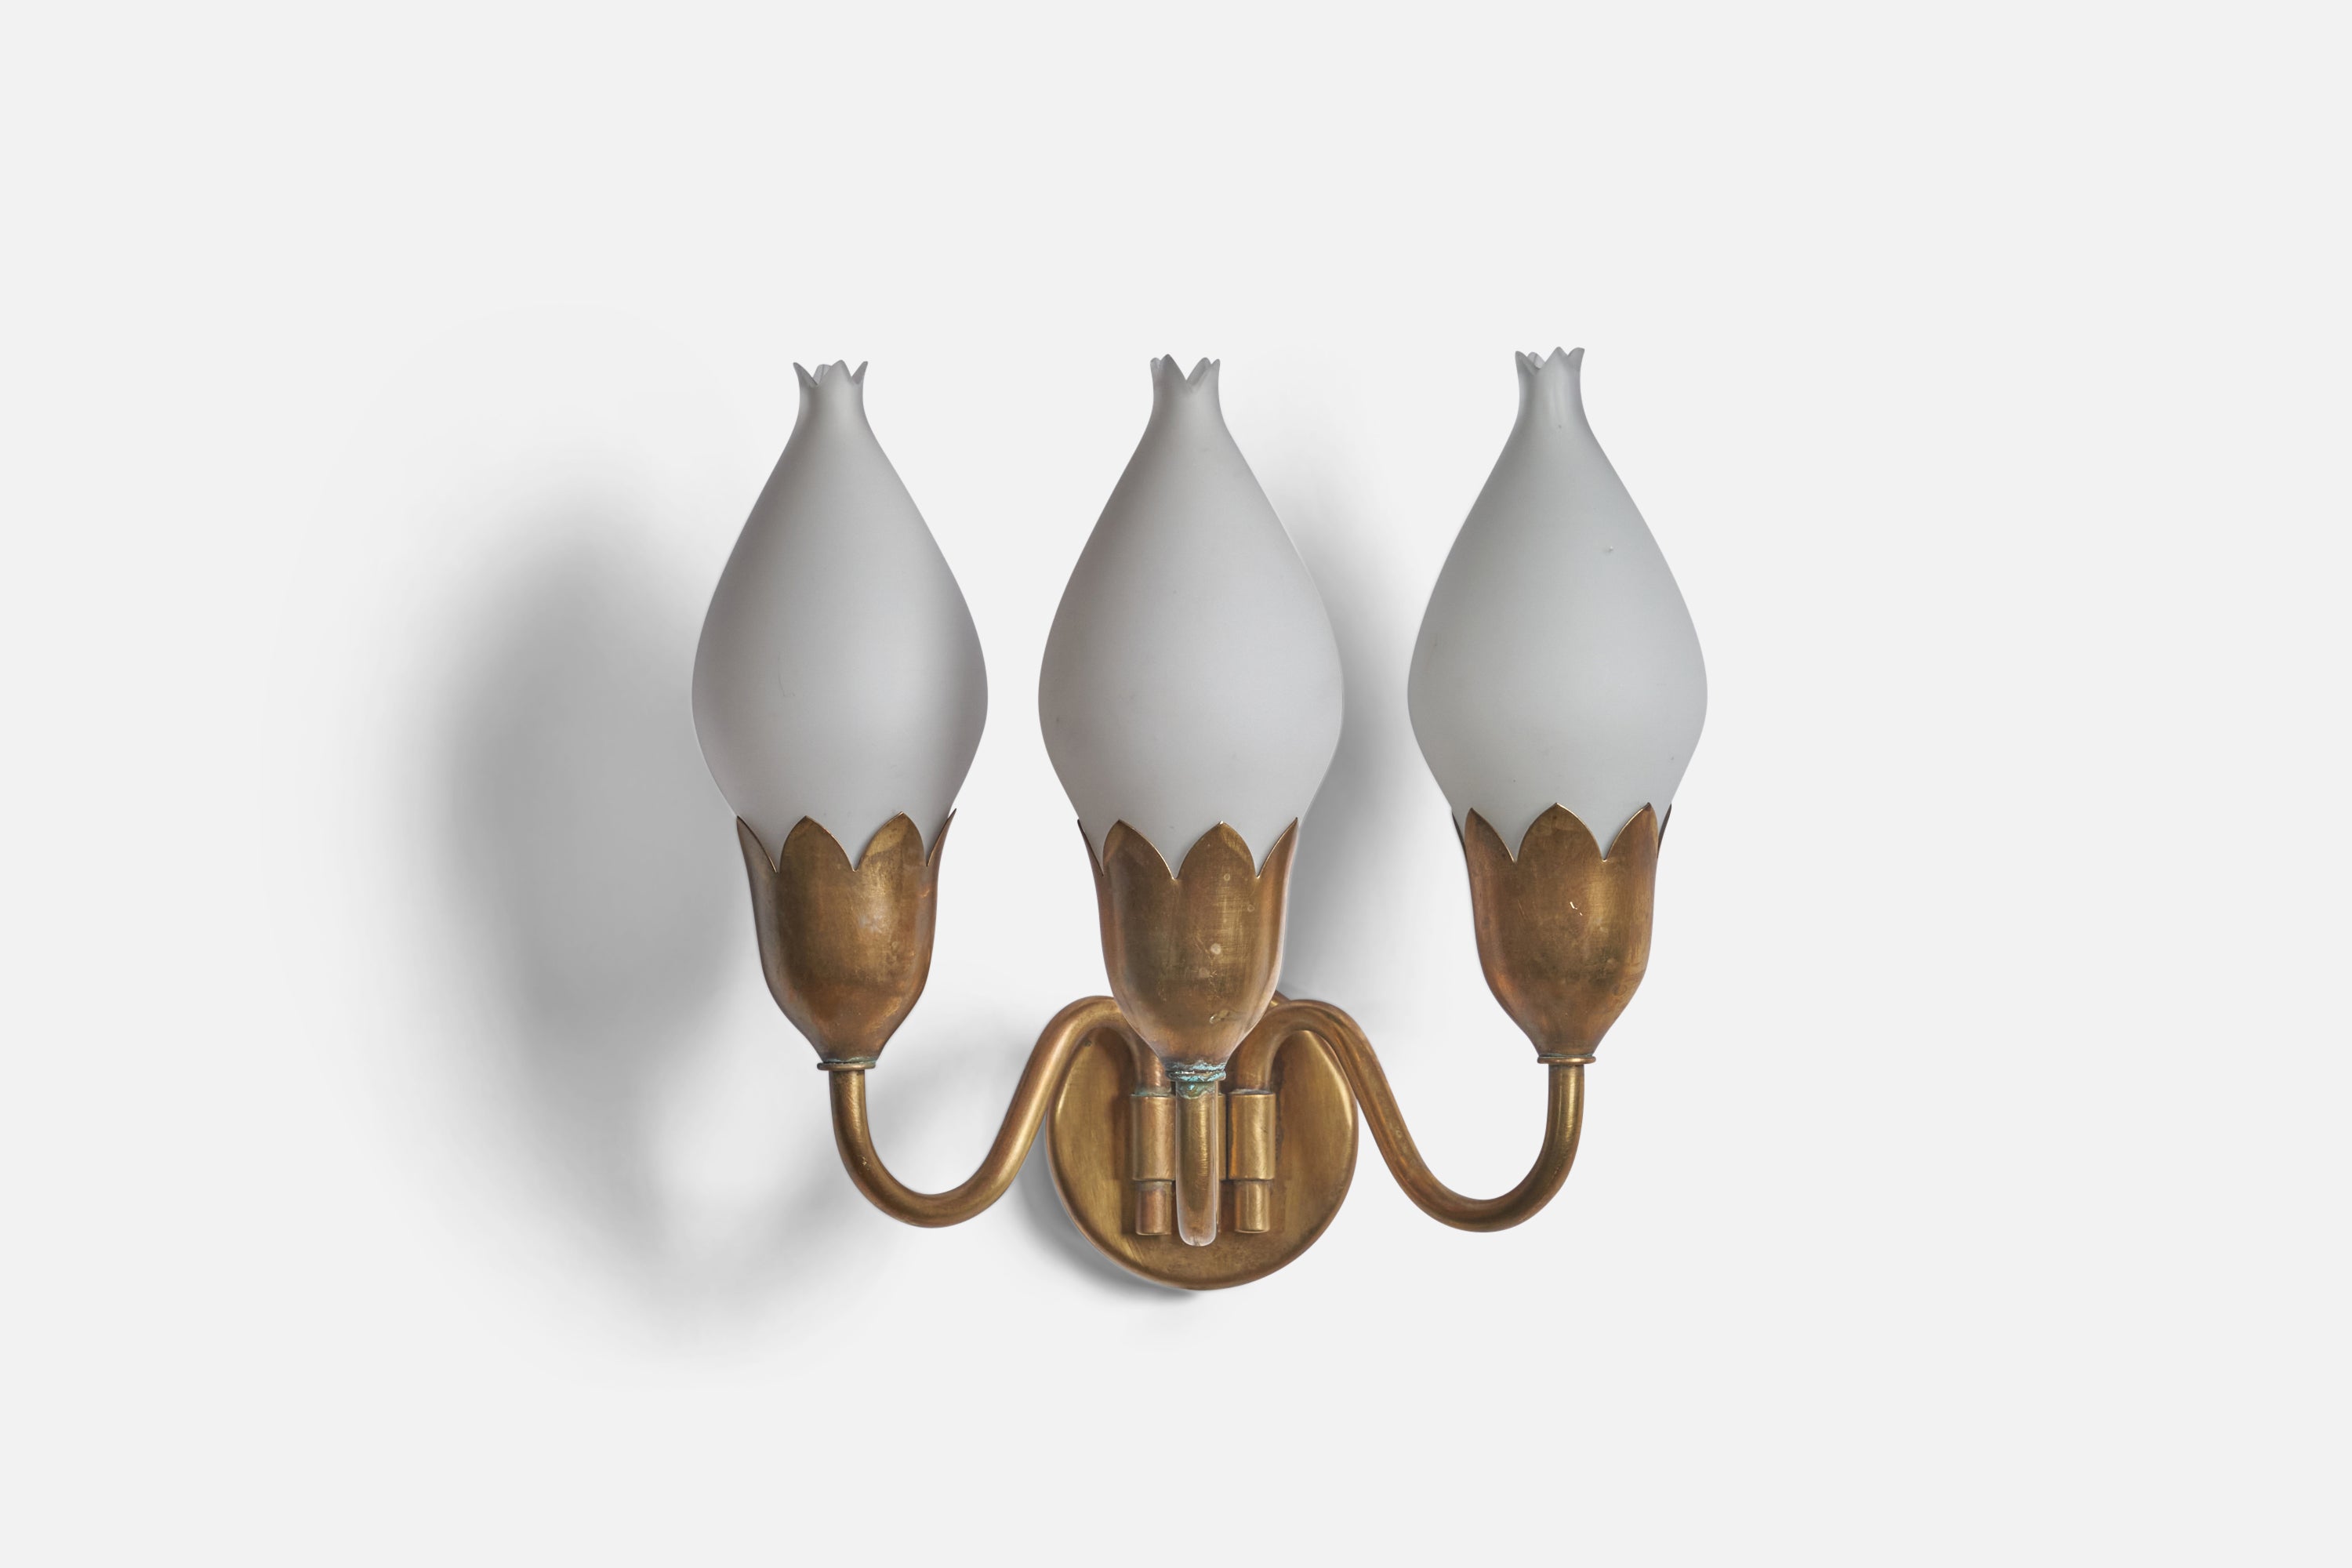 A pair of three-armed brass and glass wall lights, designed and produced by Fog & Mørup, Denmark, c. 1940s

Overall Dimensions (inches): 6